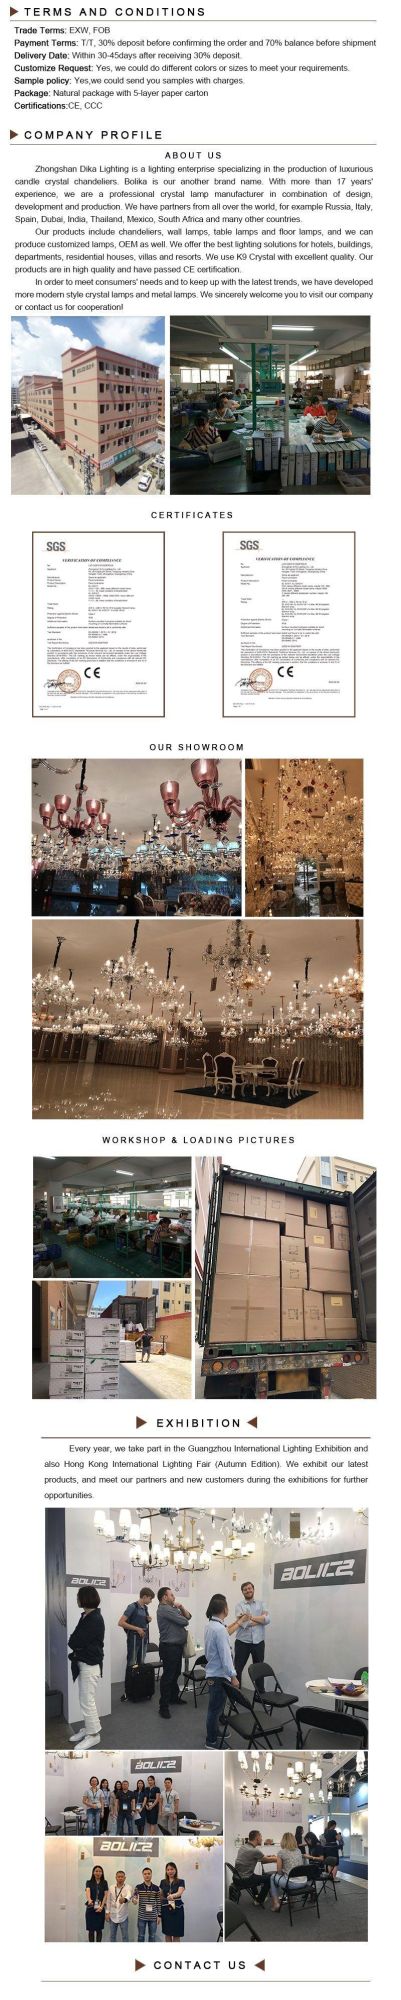 Traditioanl Large Luxury Home Lighting Furniture Decorate Indoor Living Room Custom Colour Crystal Bronze Candle Chandelier Factory Supply